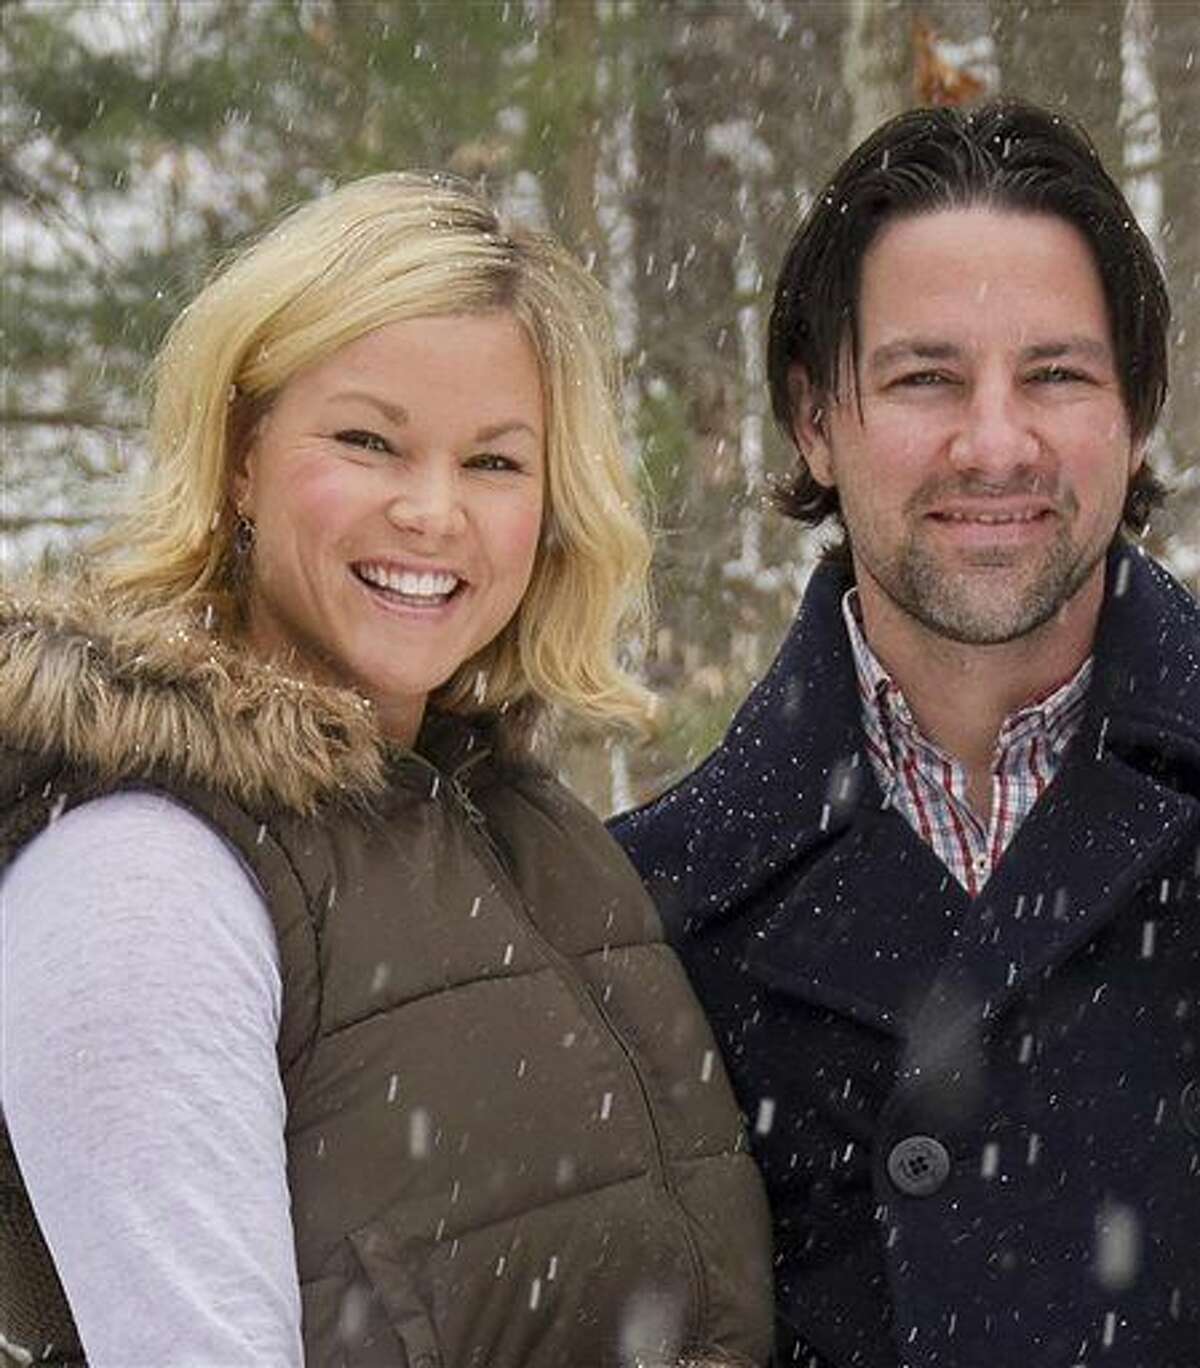 In this January 2014 photo, Thomas and Kelley Clayton pose in Caton, N.Y. Thomas Clayton, a former minor league hockey player has been charged with killing his wife inside their upstate New York home, authorities said. The Steuben County sheriff's office said deputies and state troopers responded to Thomas Clayton's home in Caton, near the Pennsylvania border, after he called 911 early Tuesday, Sept. 29, 2015, and said he found his wife dead. (Jeff Richards/The Star-Gazette via AP) 